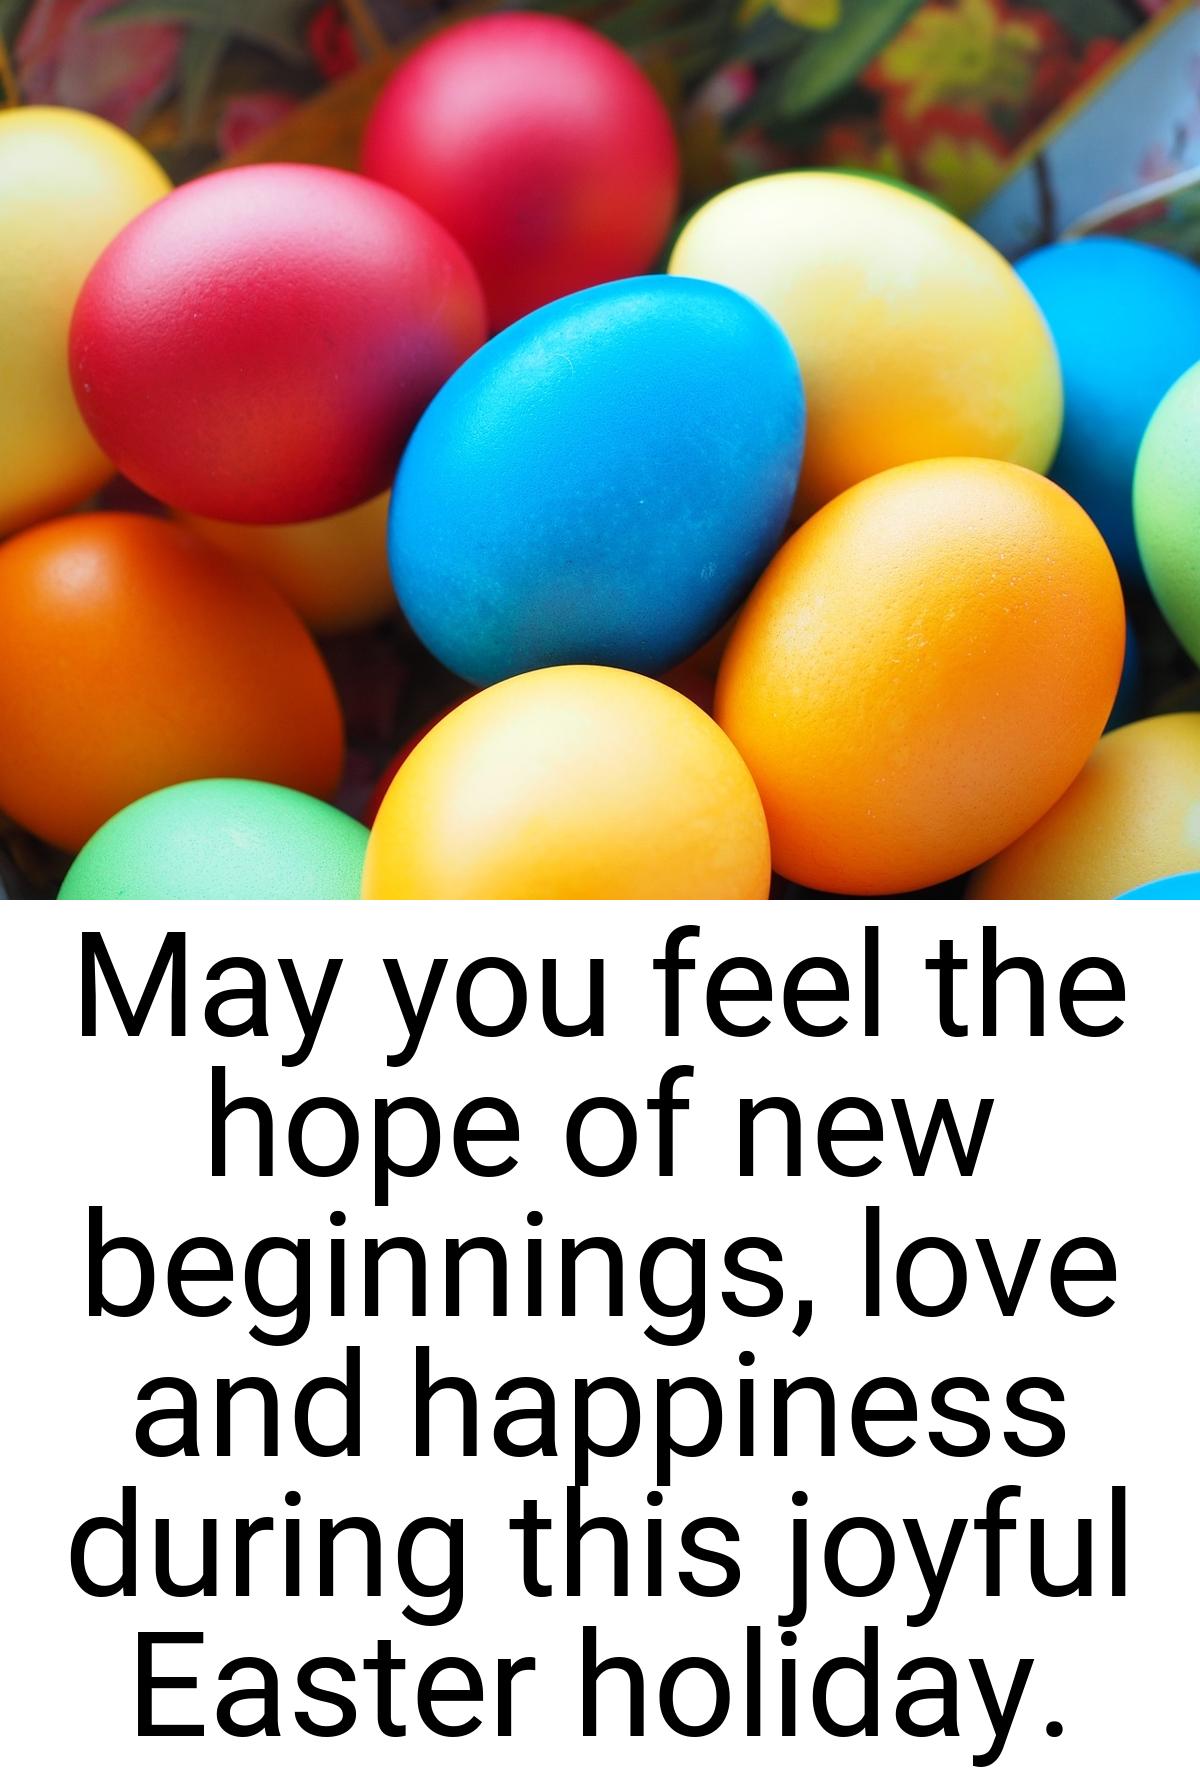 May you feel the hope of new beginnings, love and happiness